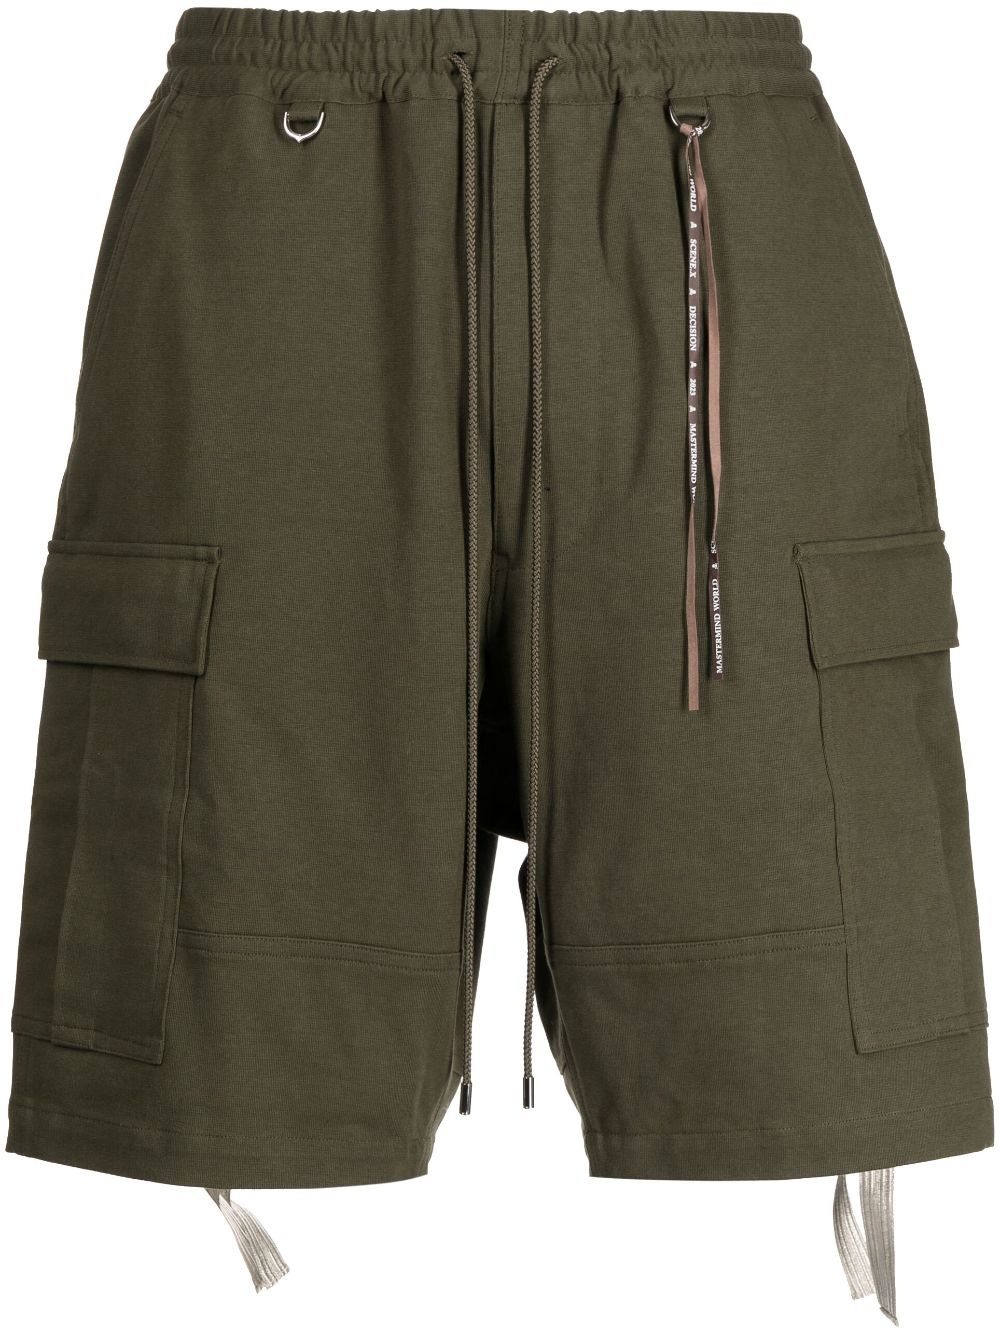 skull-embroidered cargo shorts - 1